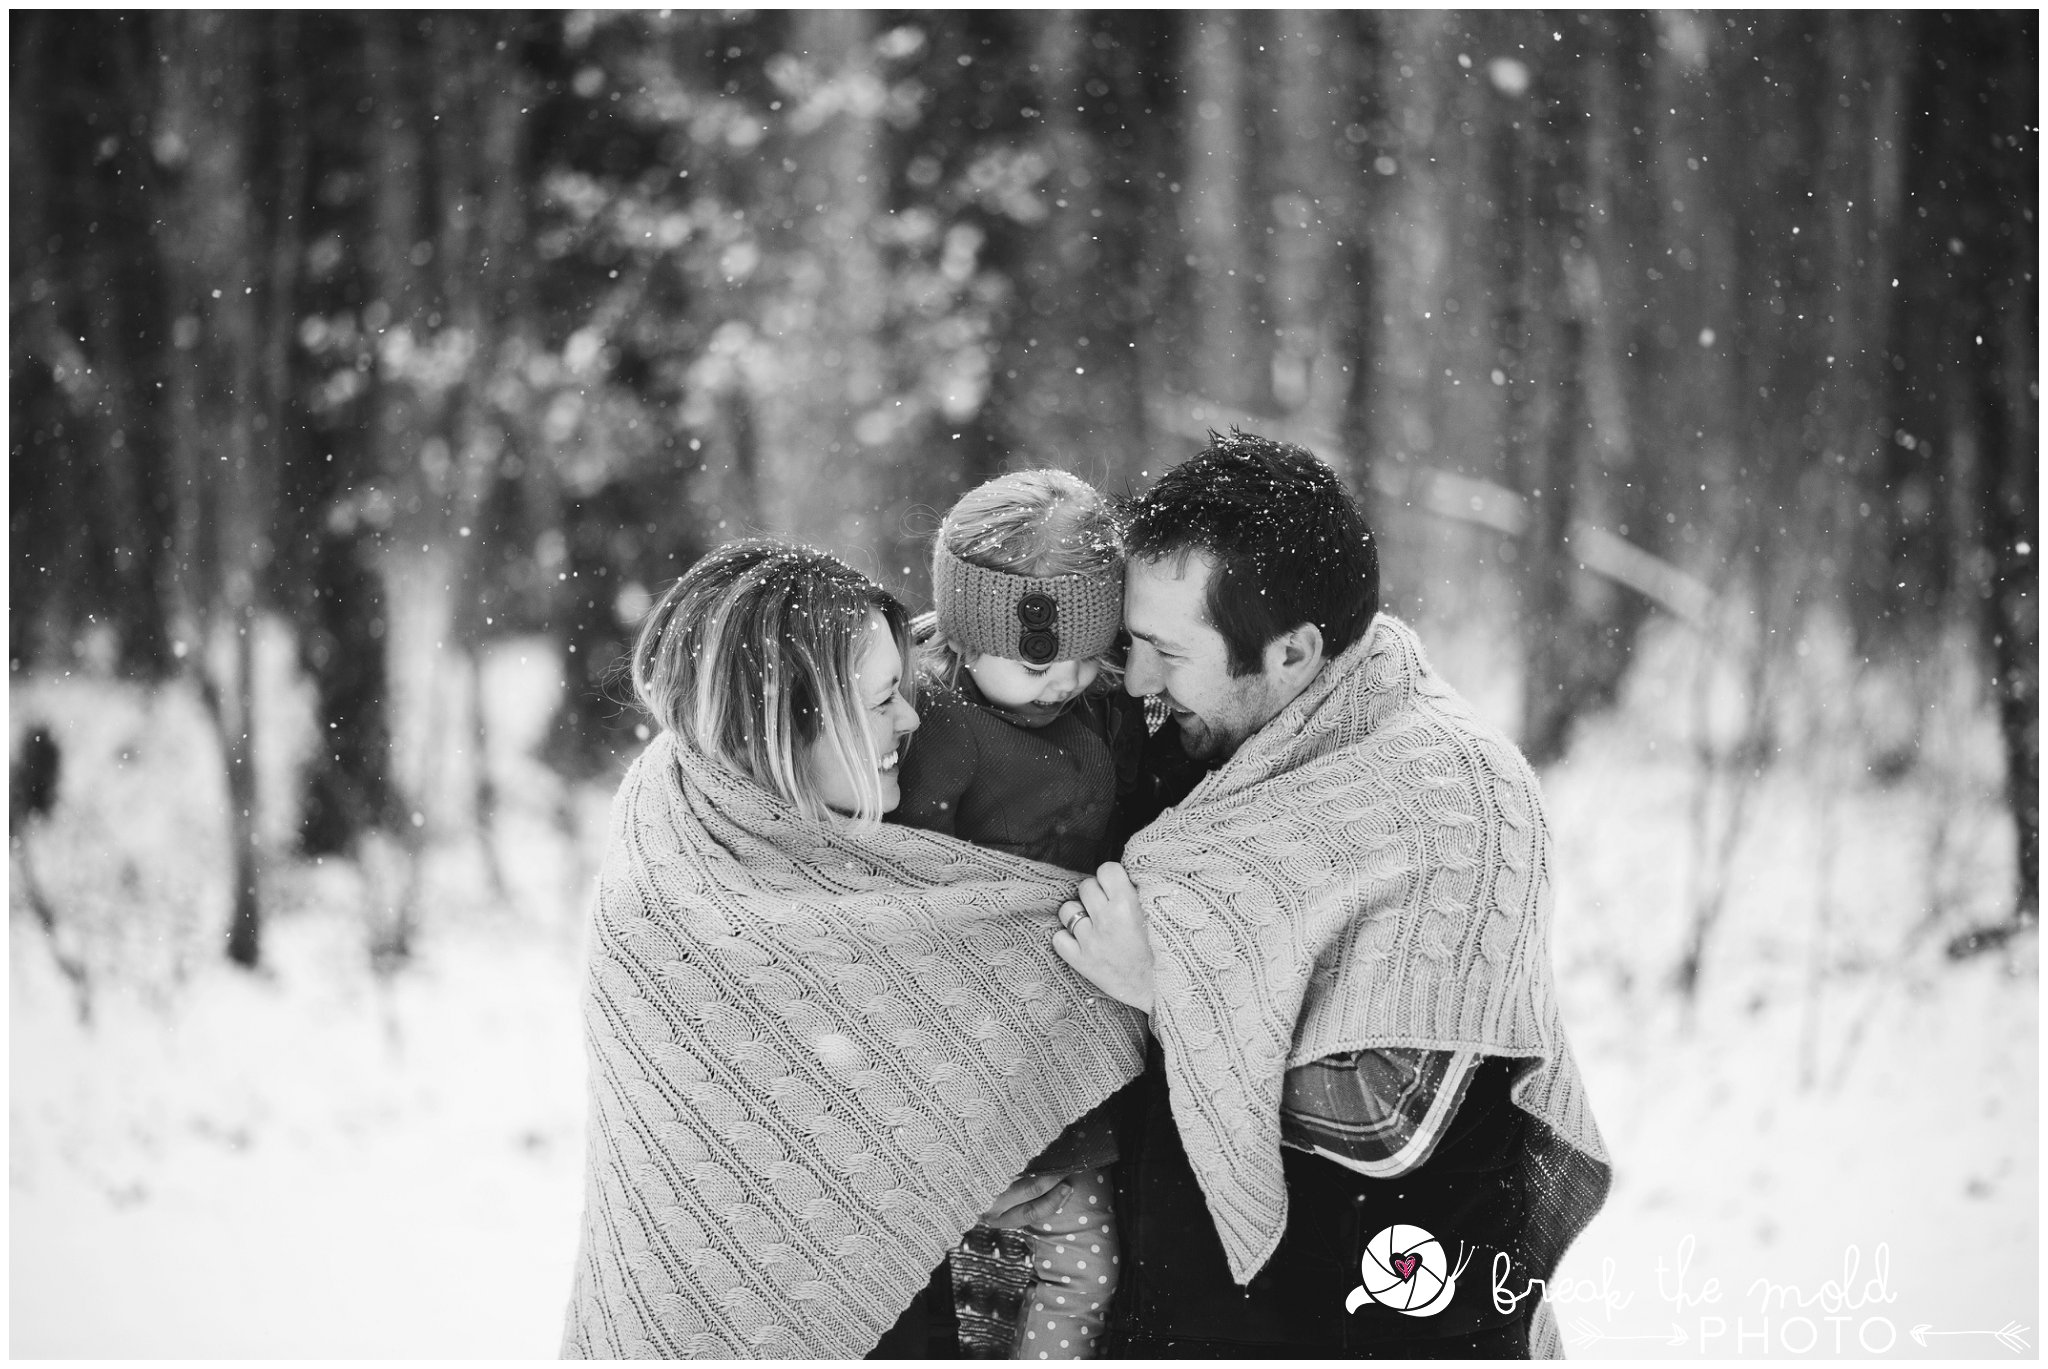 break-the-mold-photo-snowy-day-engagement-photos-knoxville-tn-tennessee-snow-day-pictures-winter-outdoor-unique-family_1518.jpg